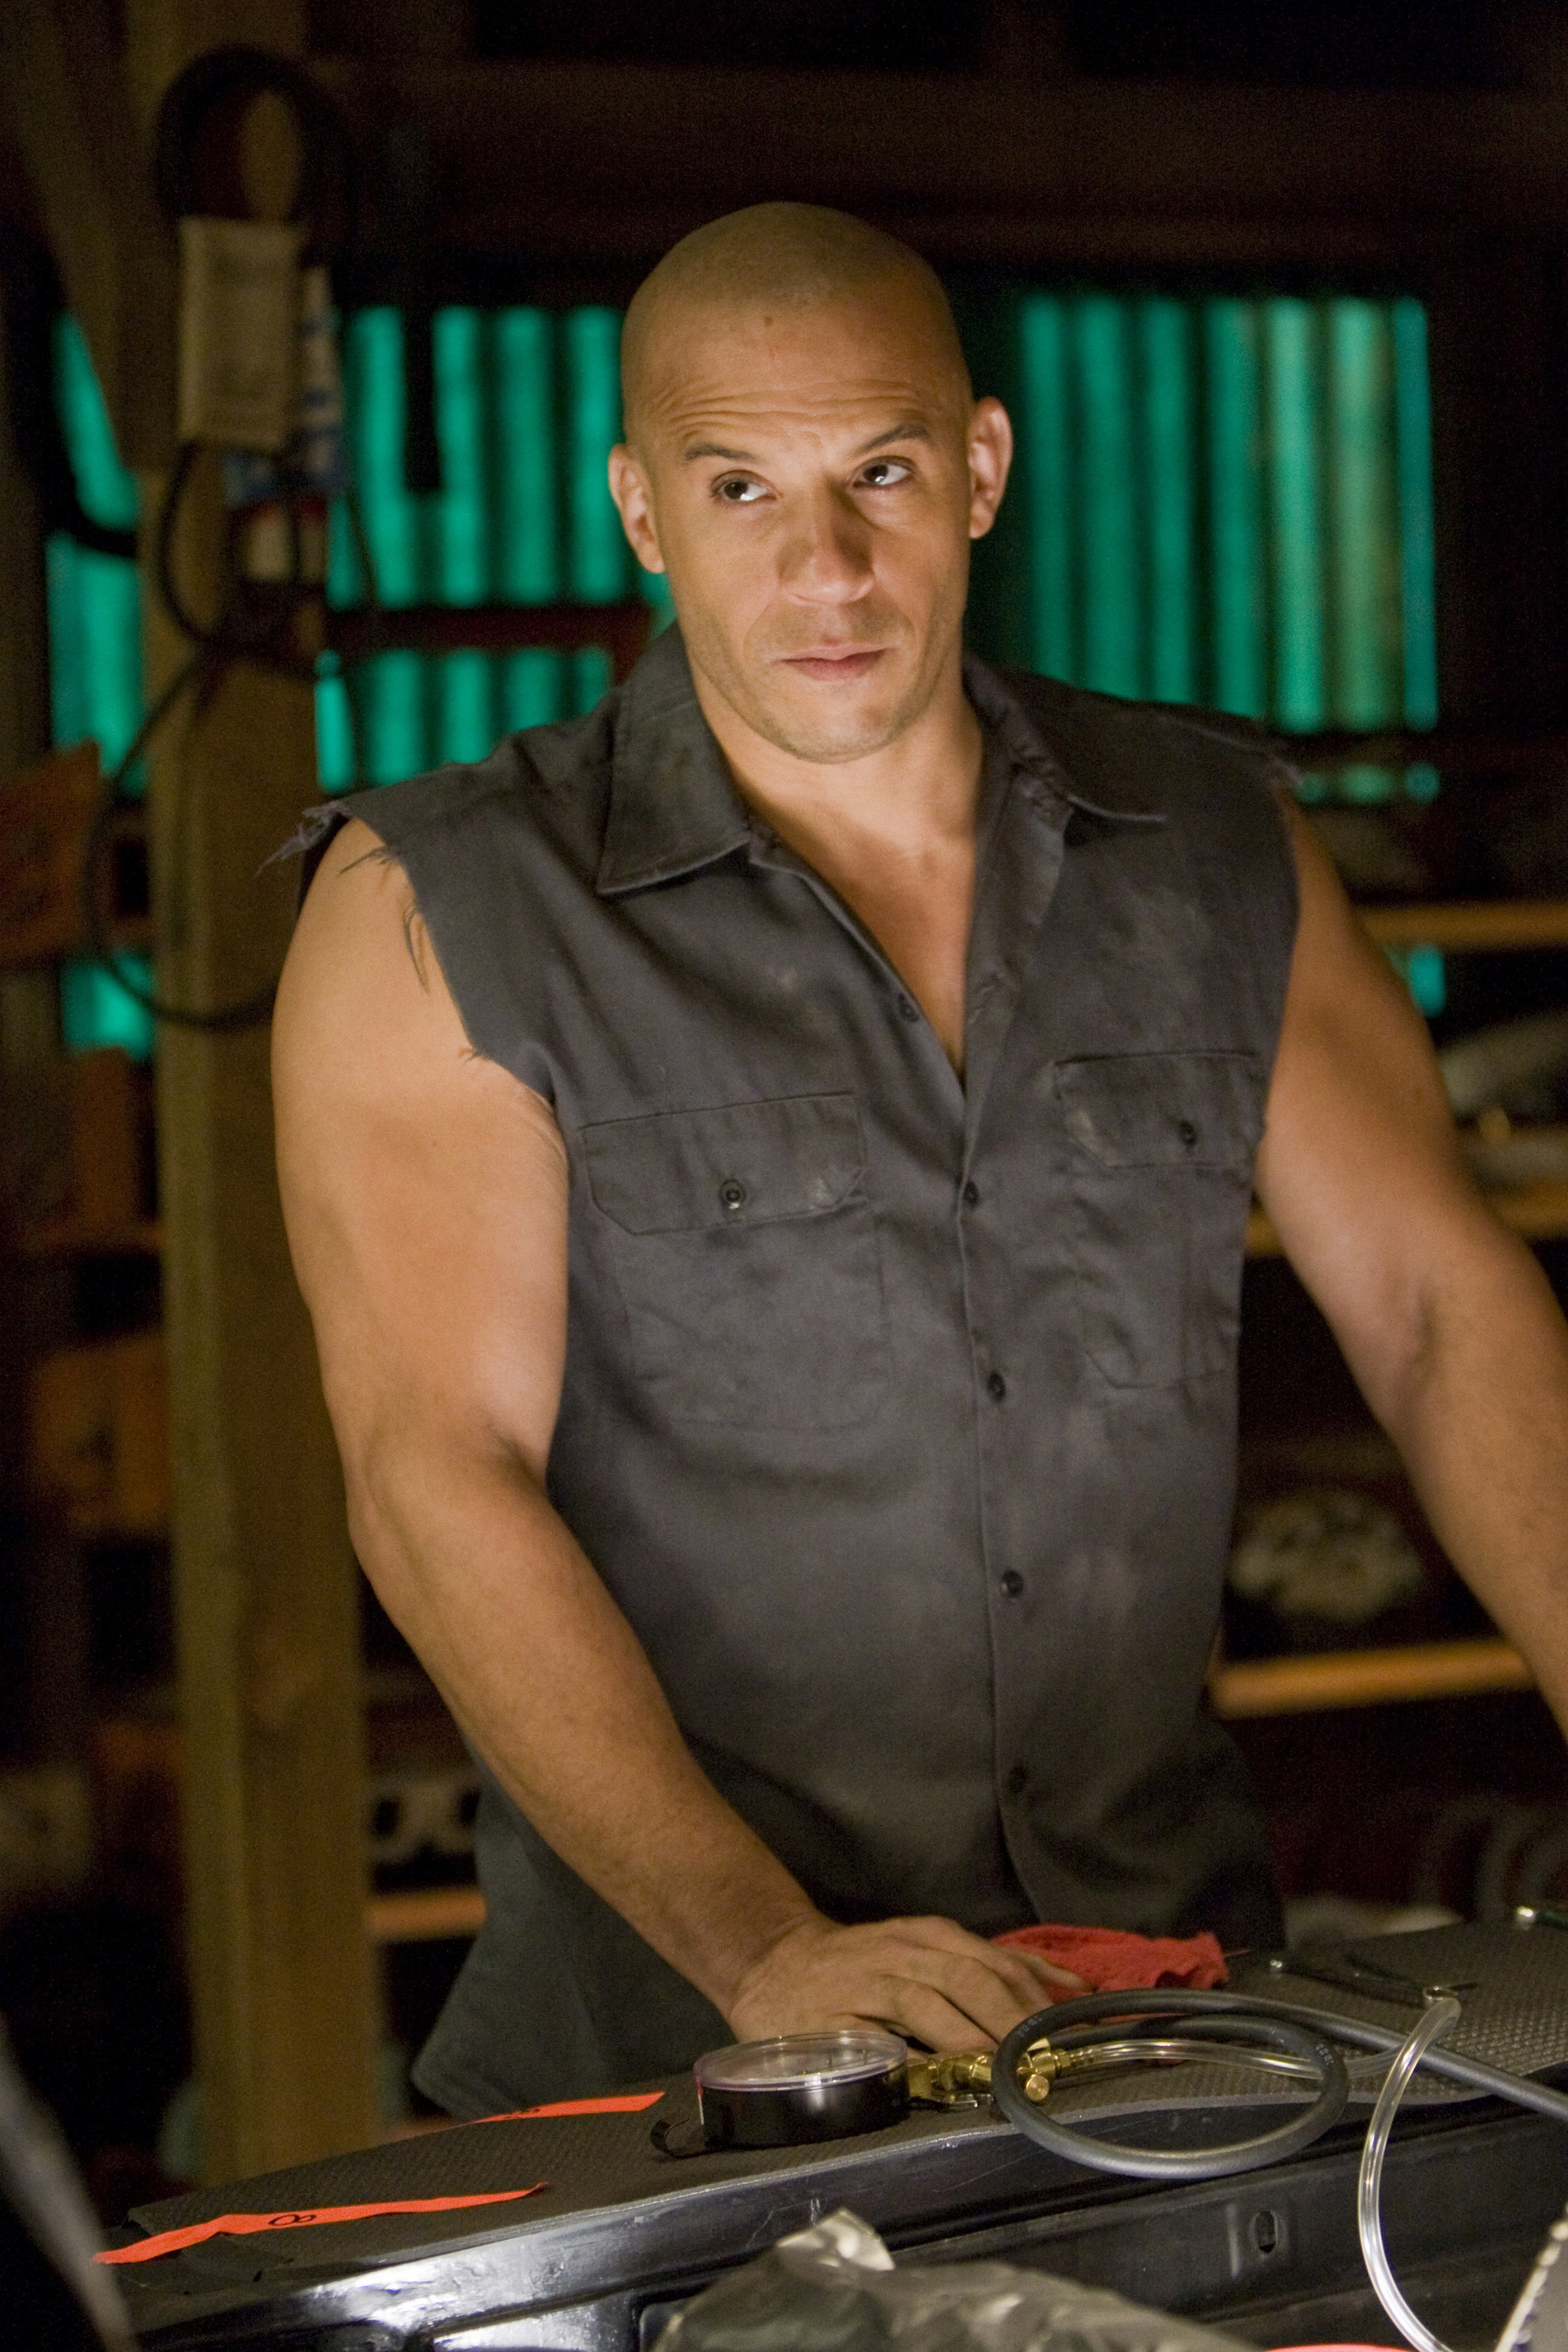 New Fast and Furious - Upcoming Movies Photo (3971830) - Fanpop